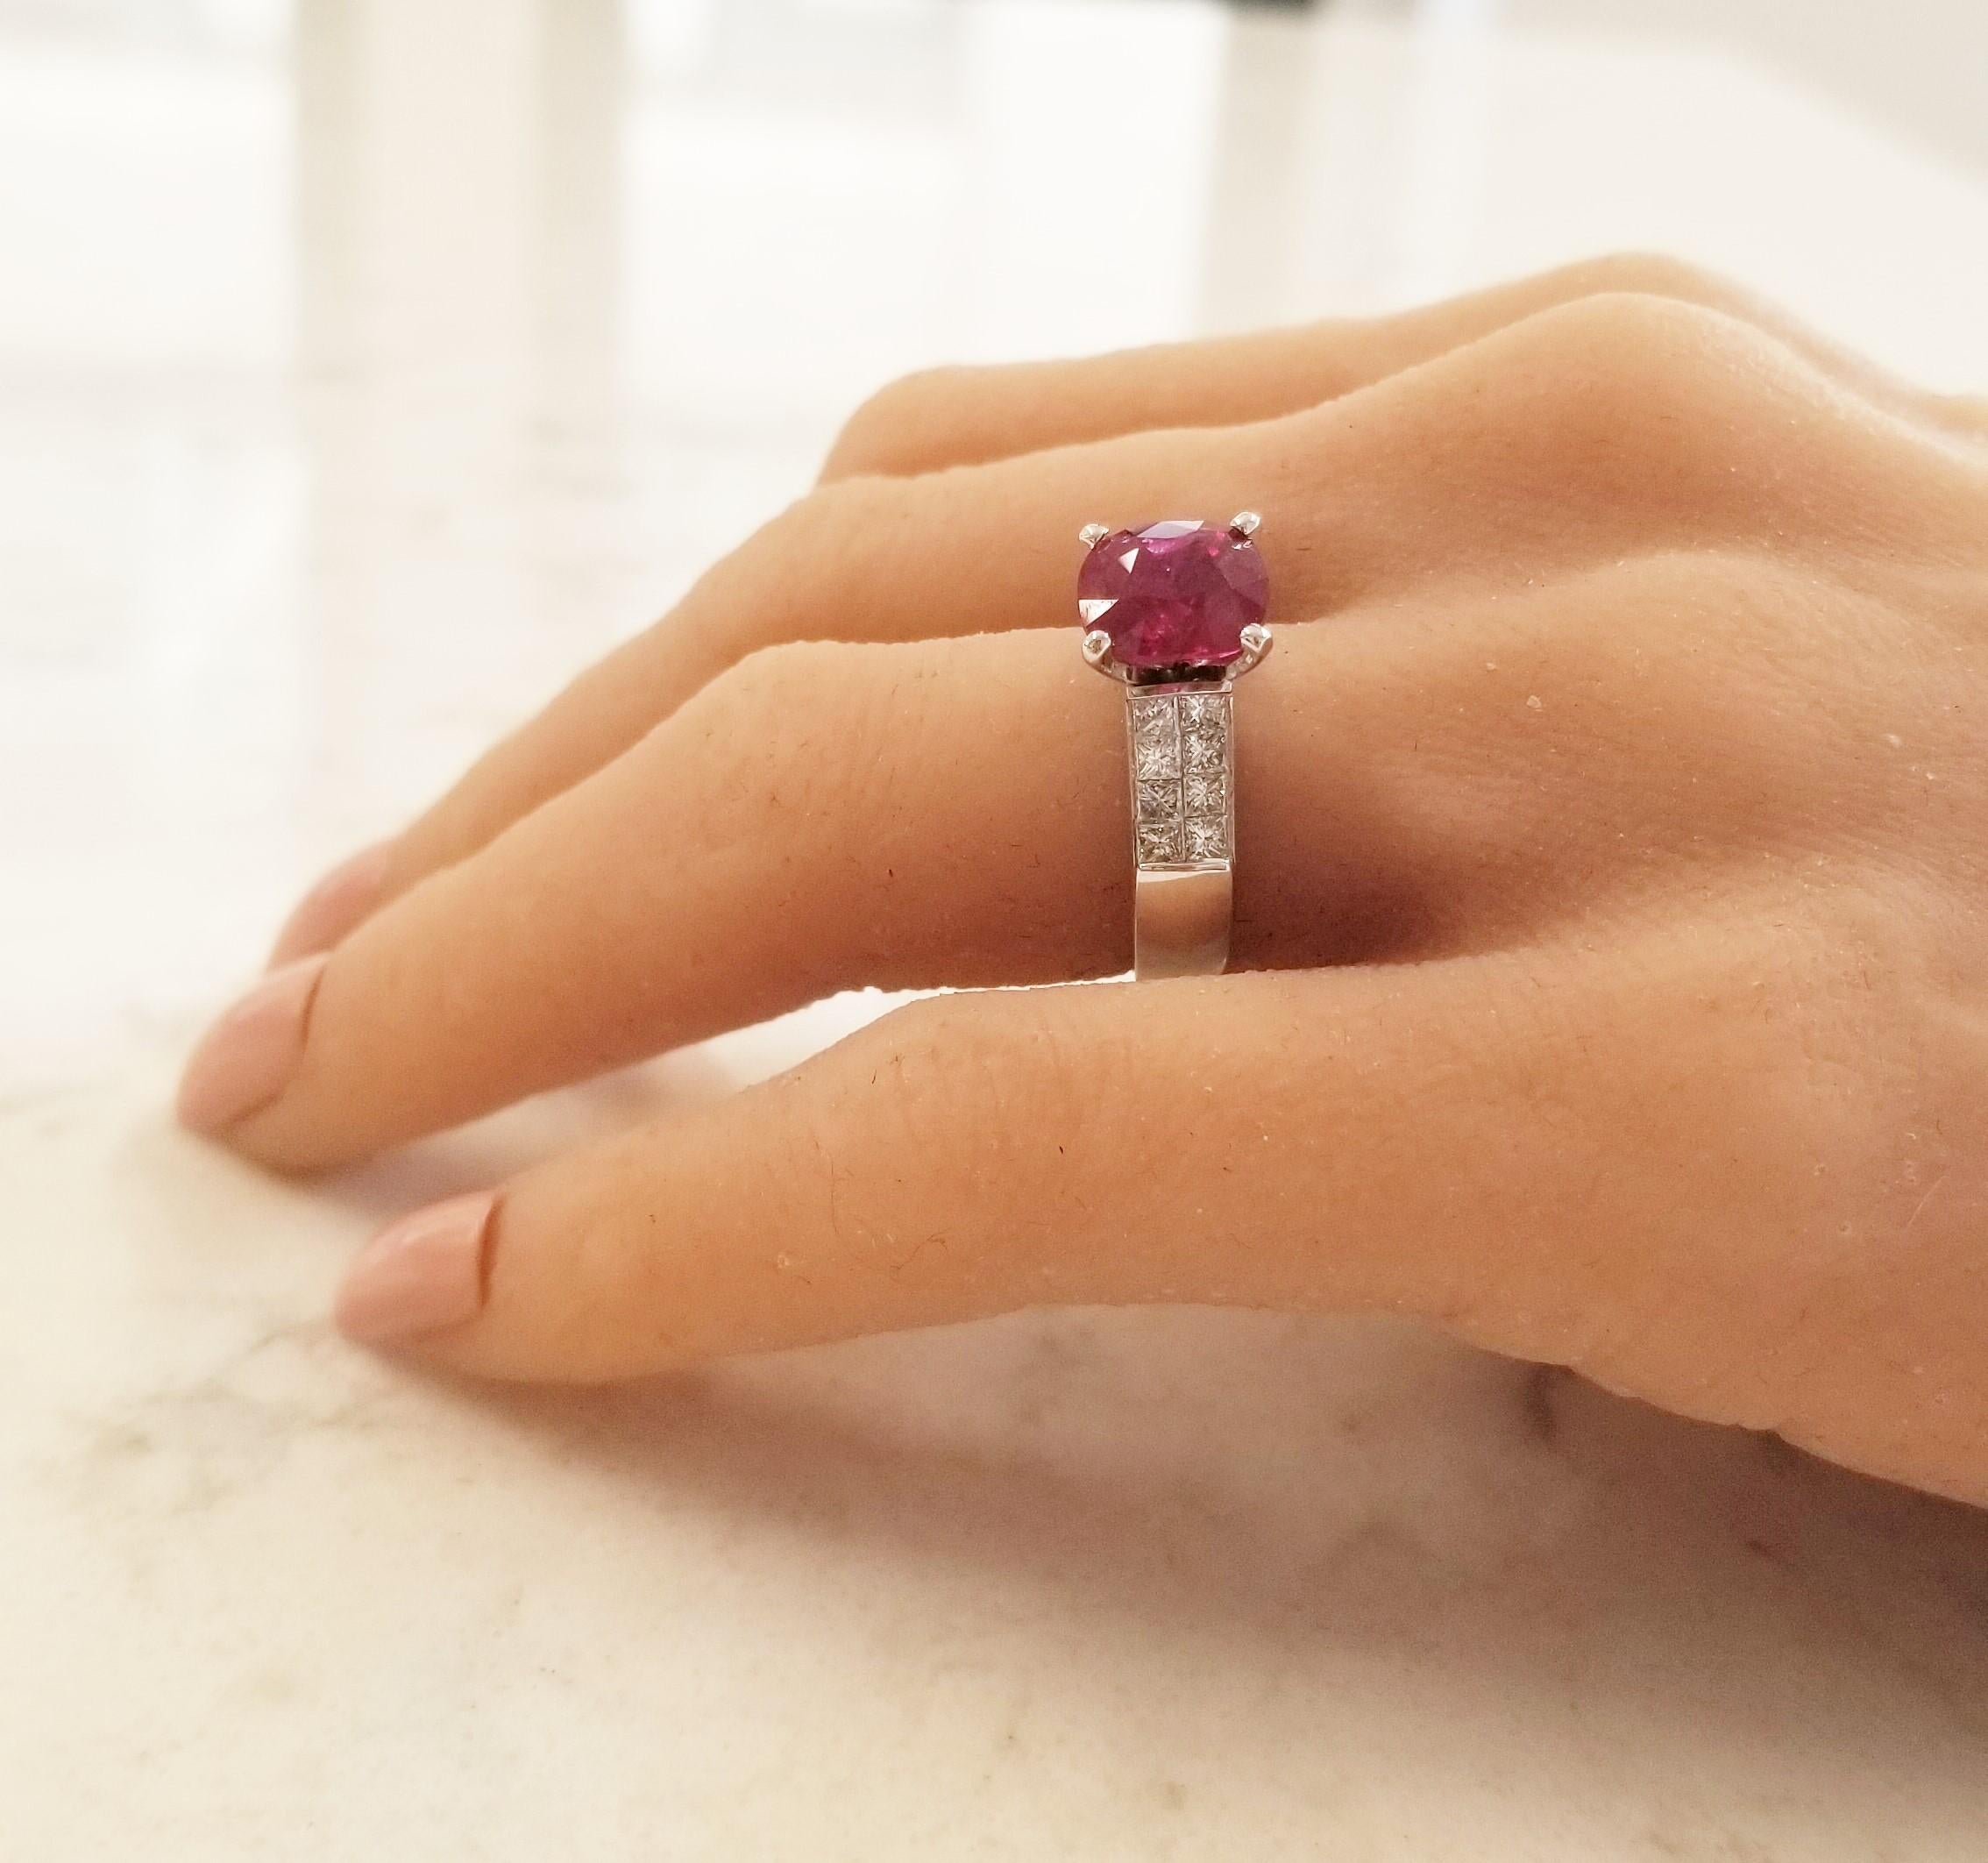 Stylish and sophisticated, this timeless royal ruby and diamond ring is utterly magnificent. No one will be able to take their eyes off the lively 4.02 Carat - 9.19 X 8.07 millimeter AIGS certified oval ruby, which is expertly paired with a double